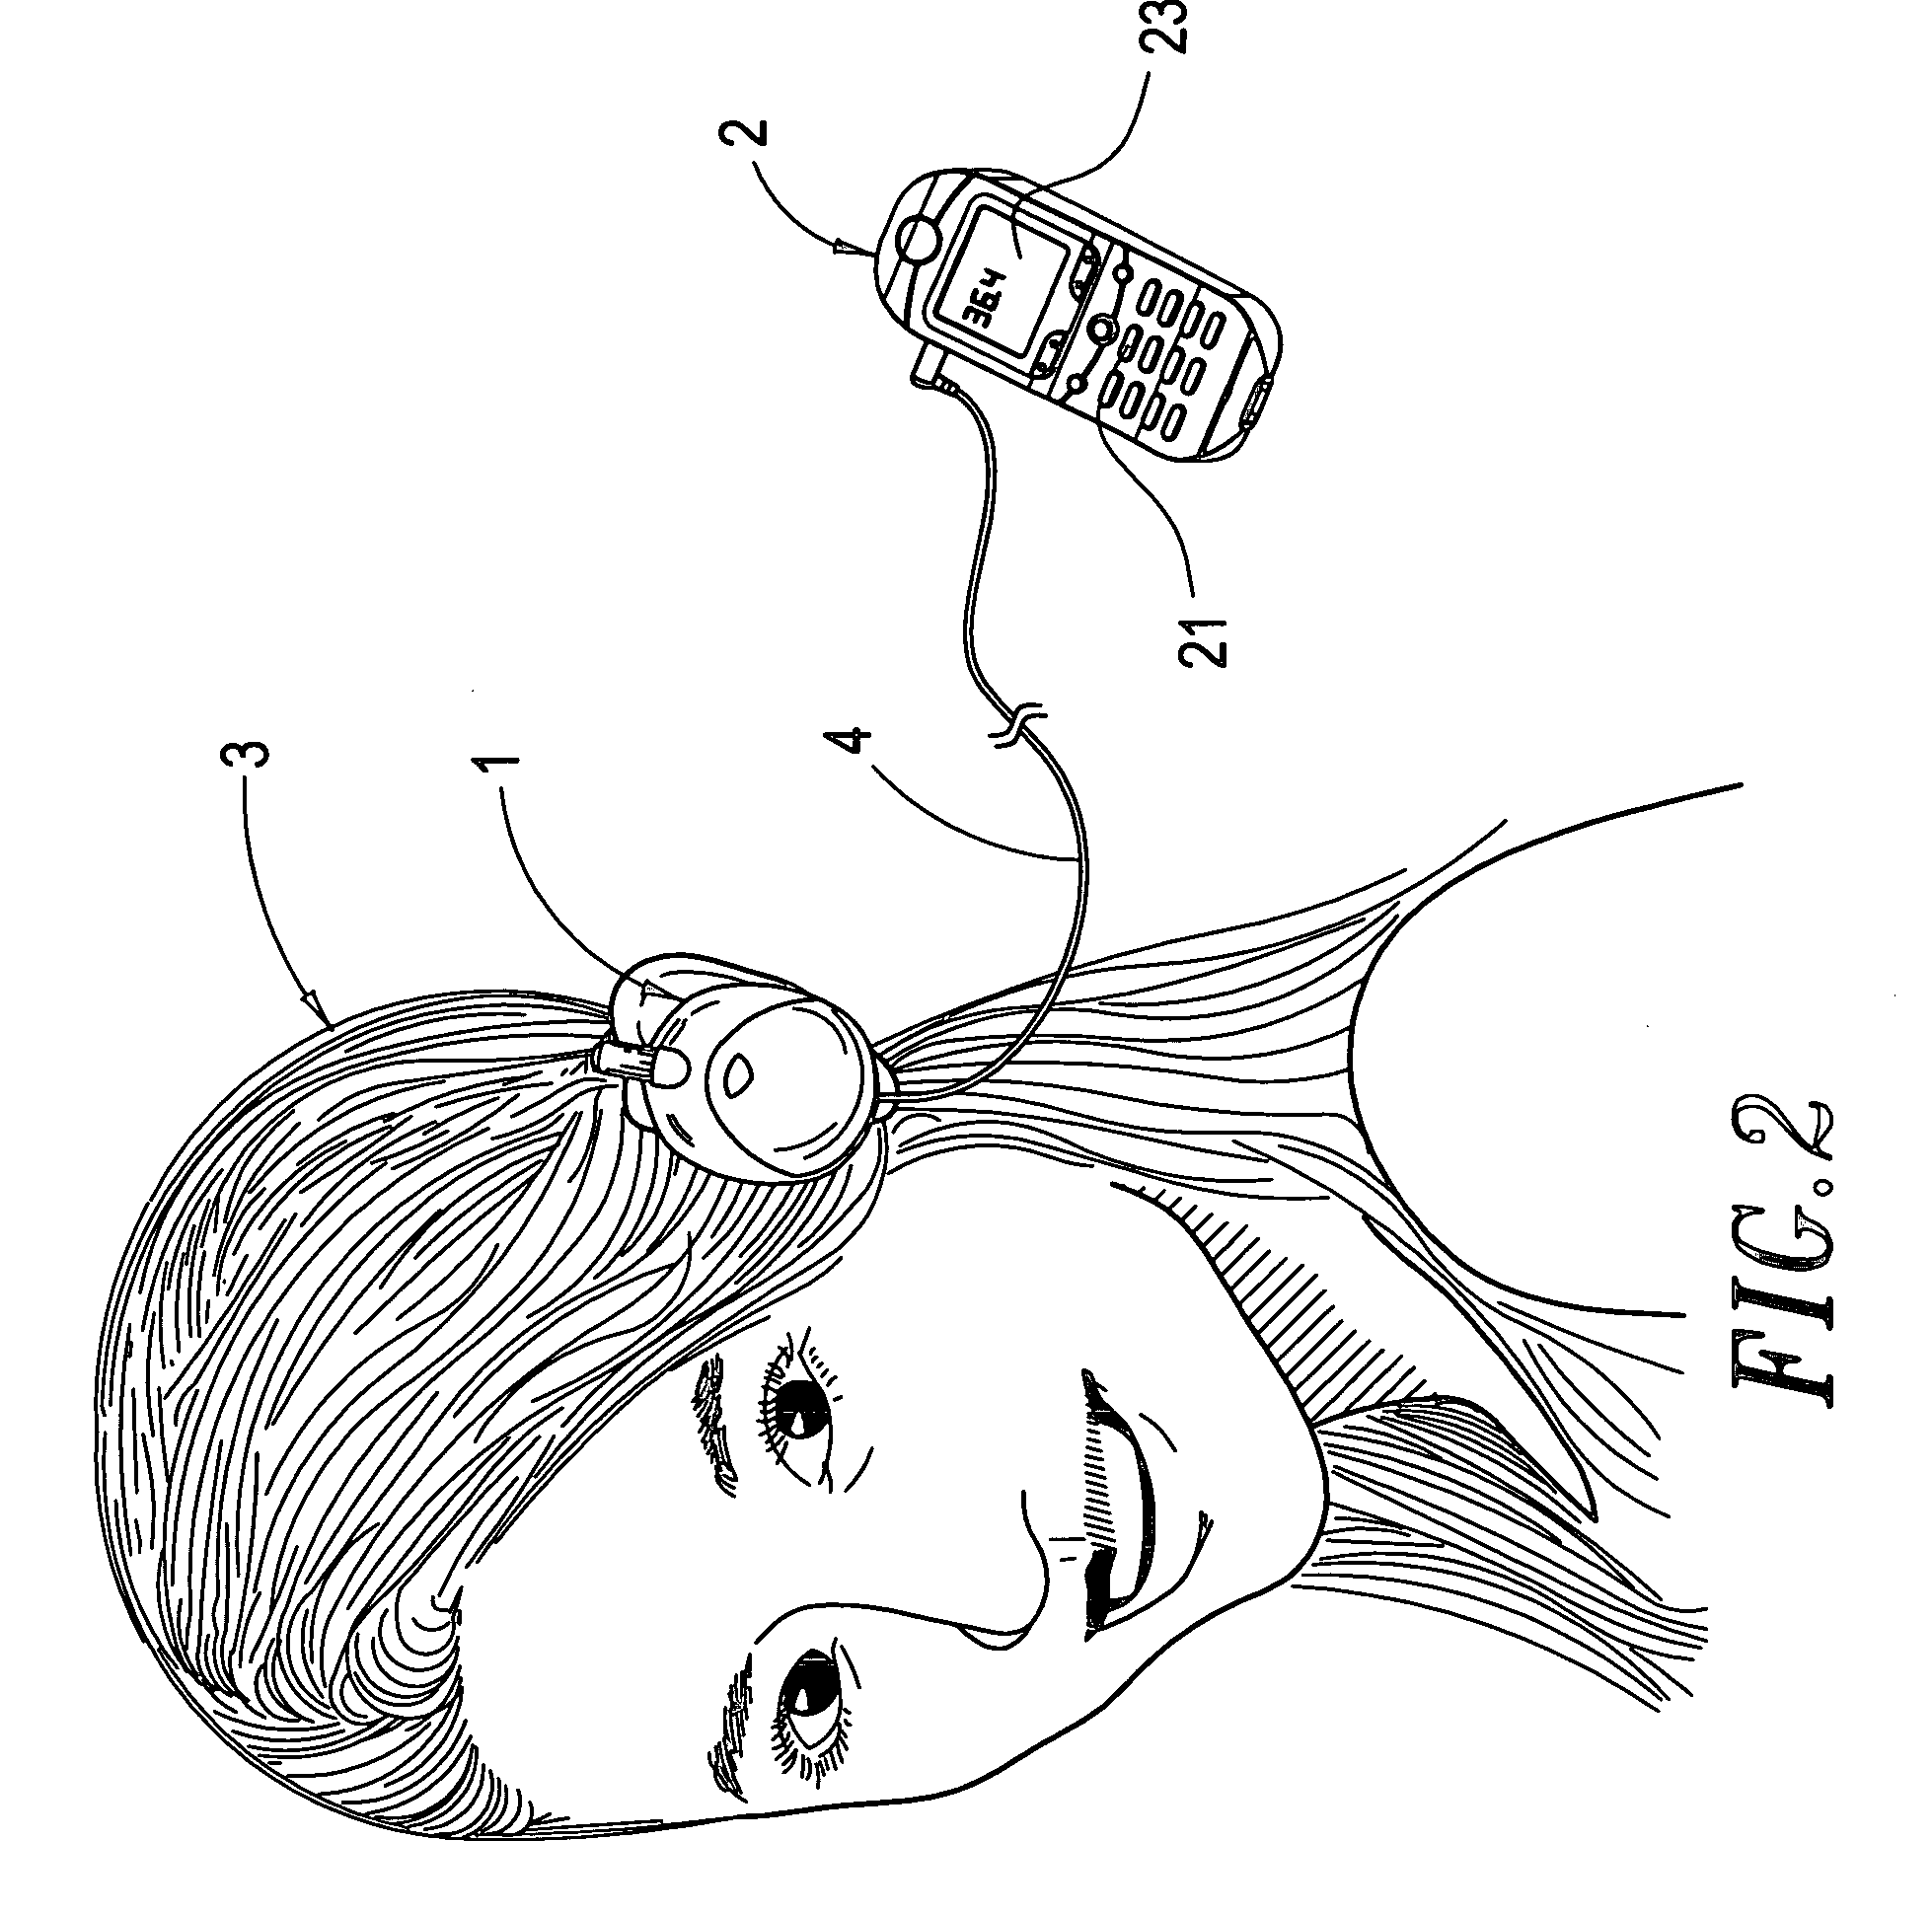 Earphone-type physiological function detecting system